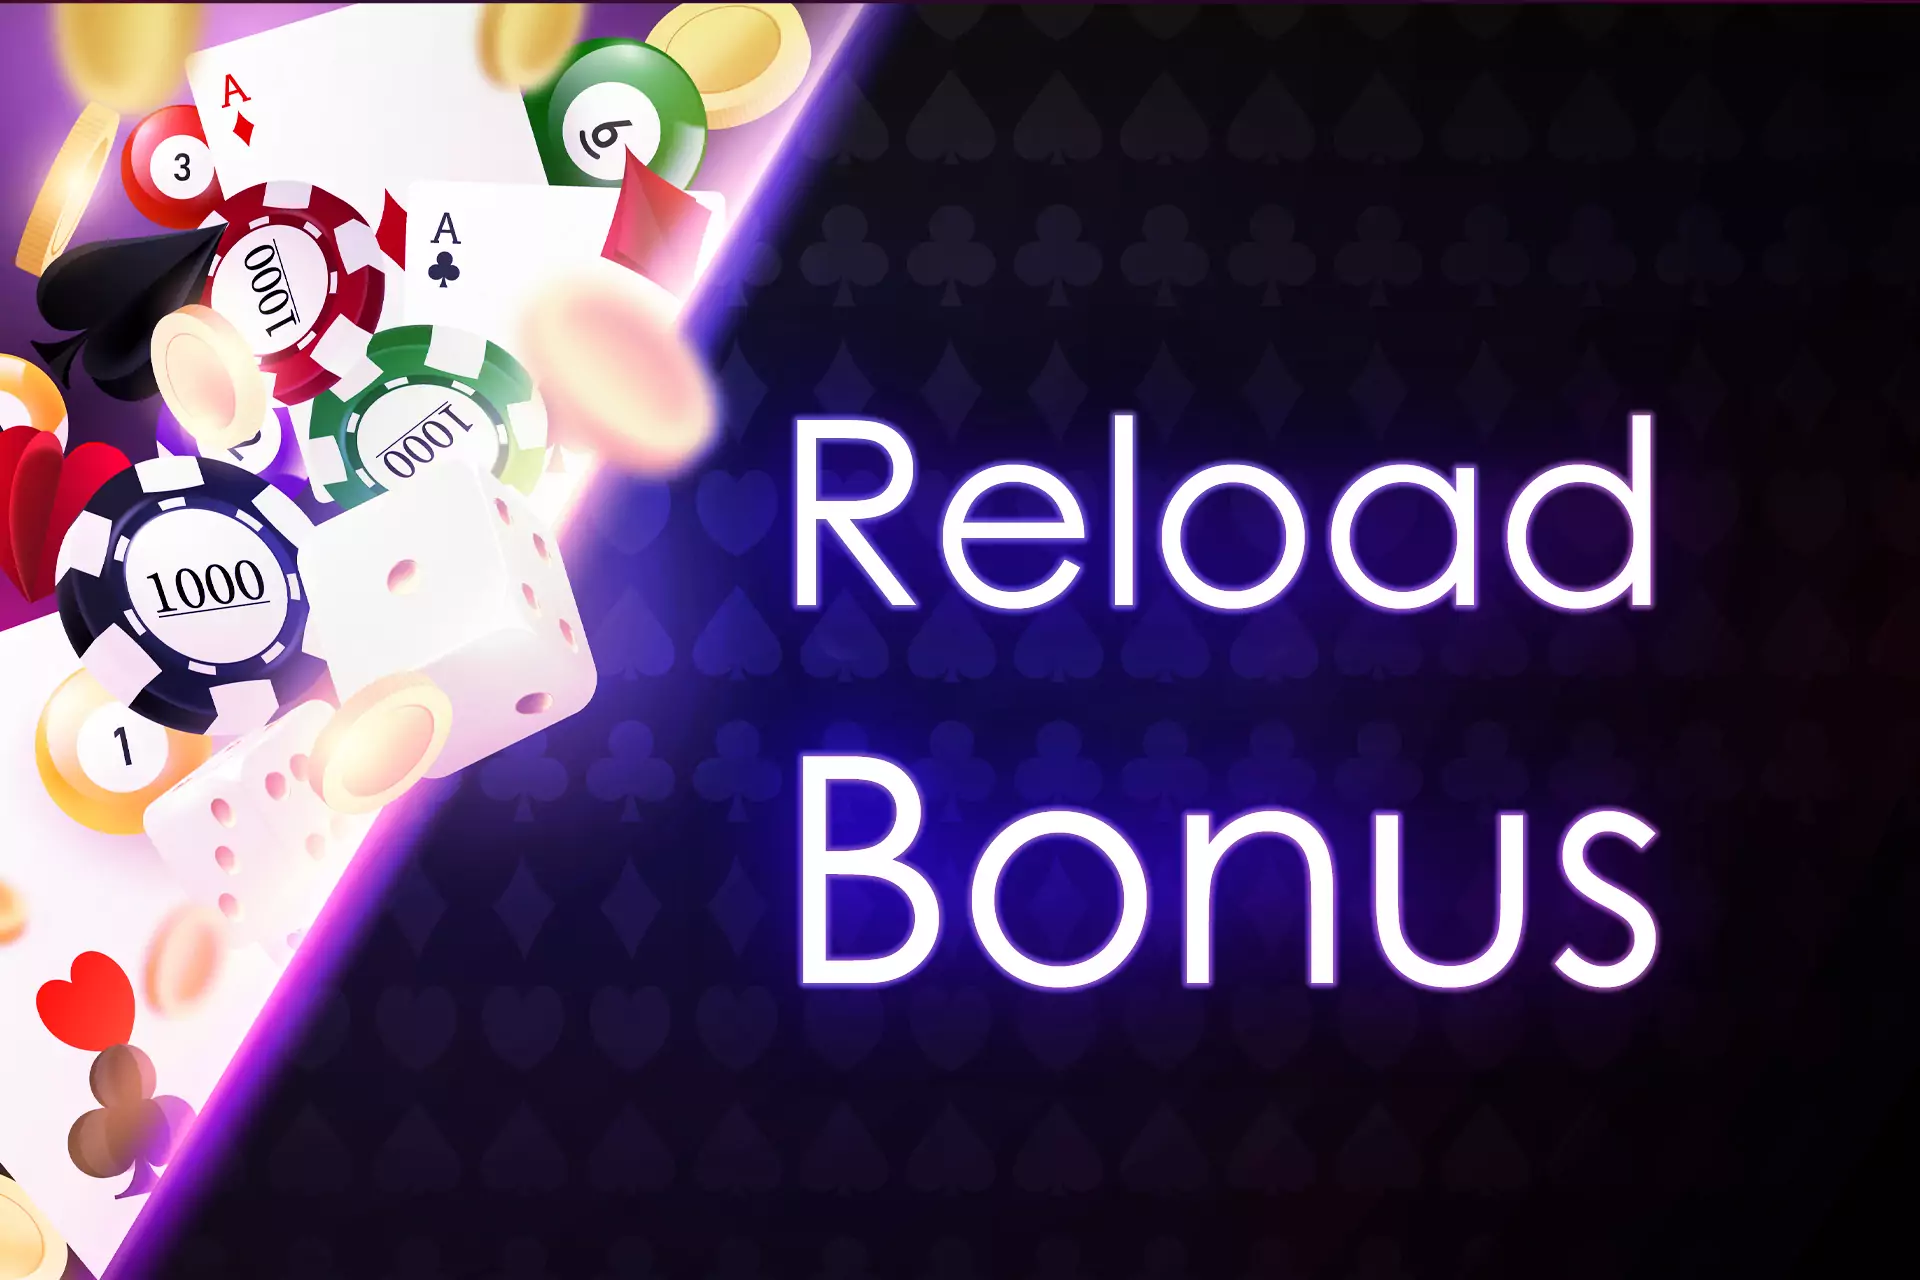 Reload bonus suspects you getting a bonus for following some conditions.